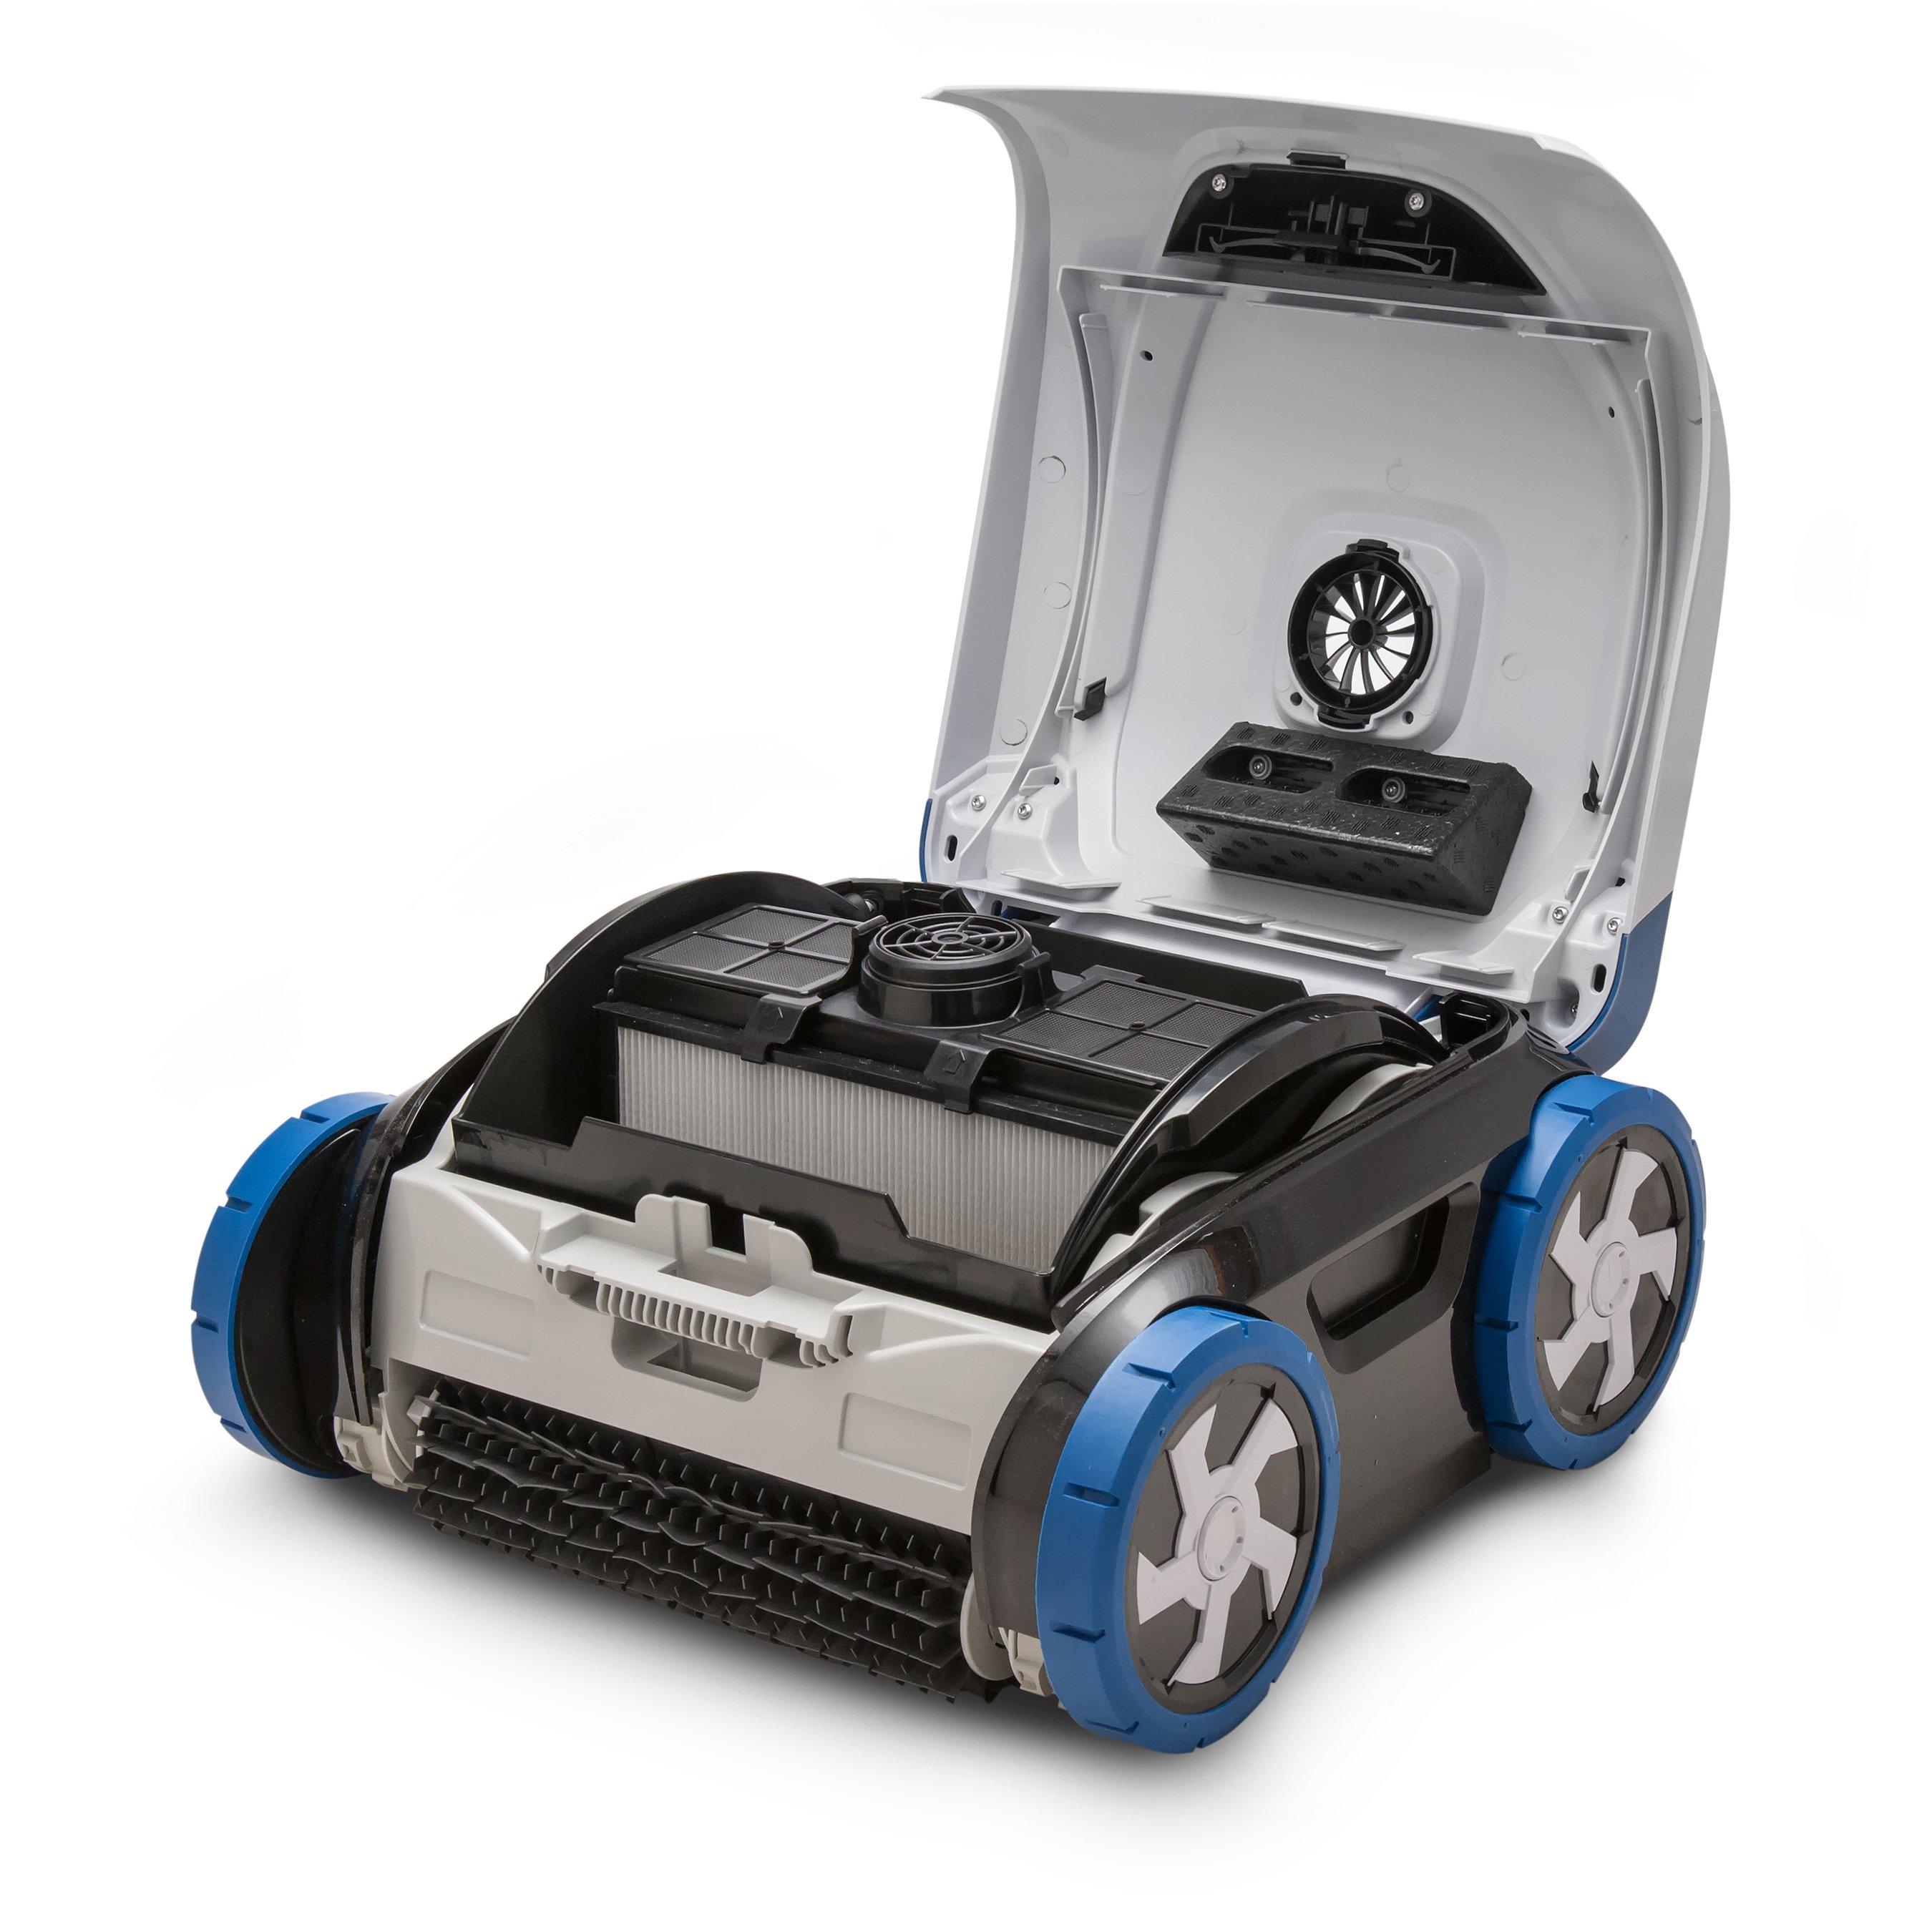 Hayward  AquaVac 500 Robotic Pool Cleaner without Caddy Cart